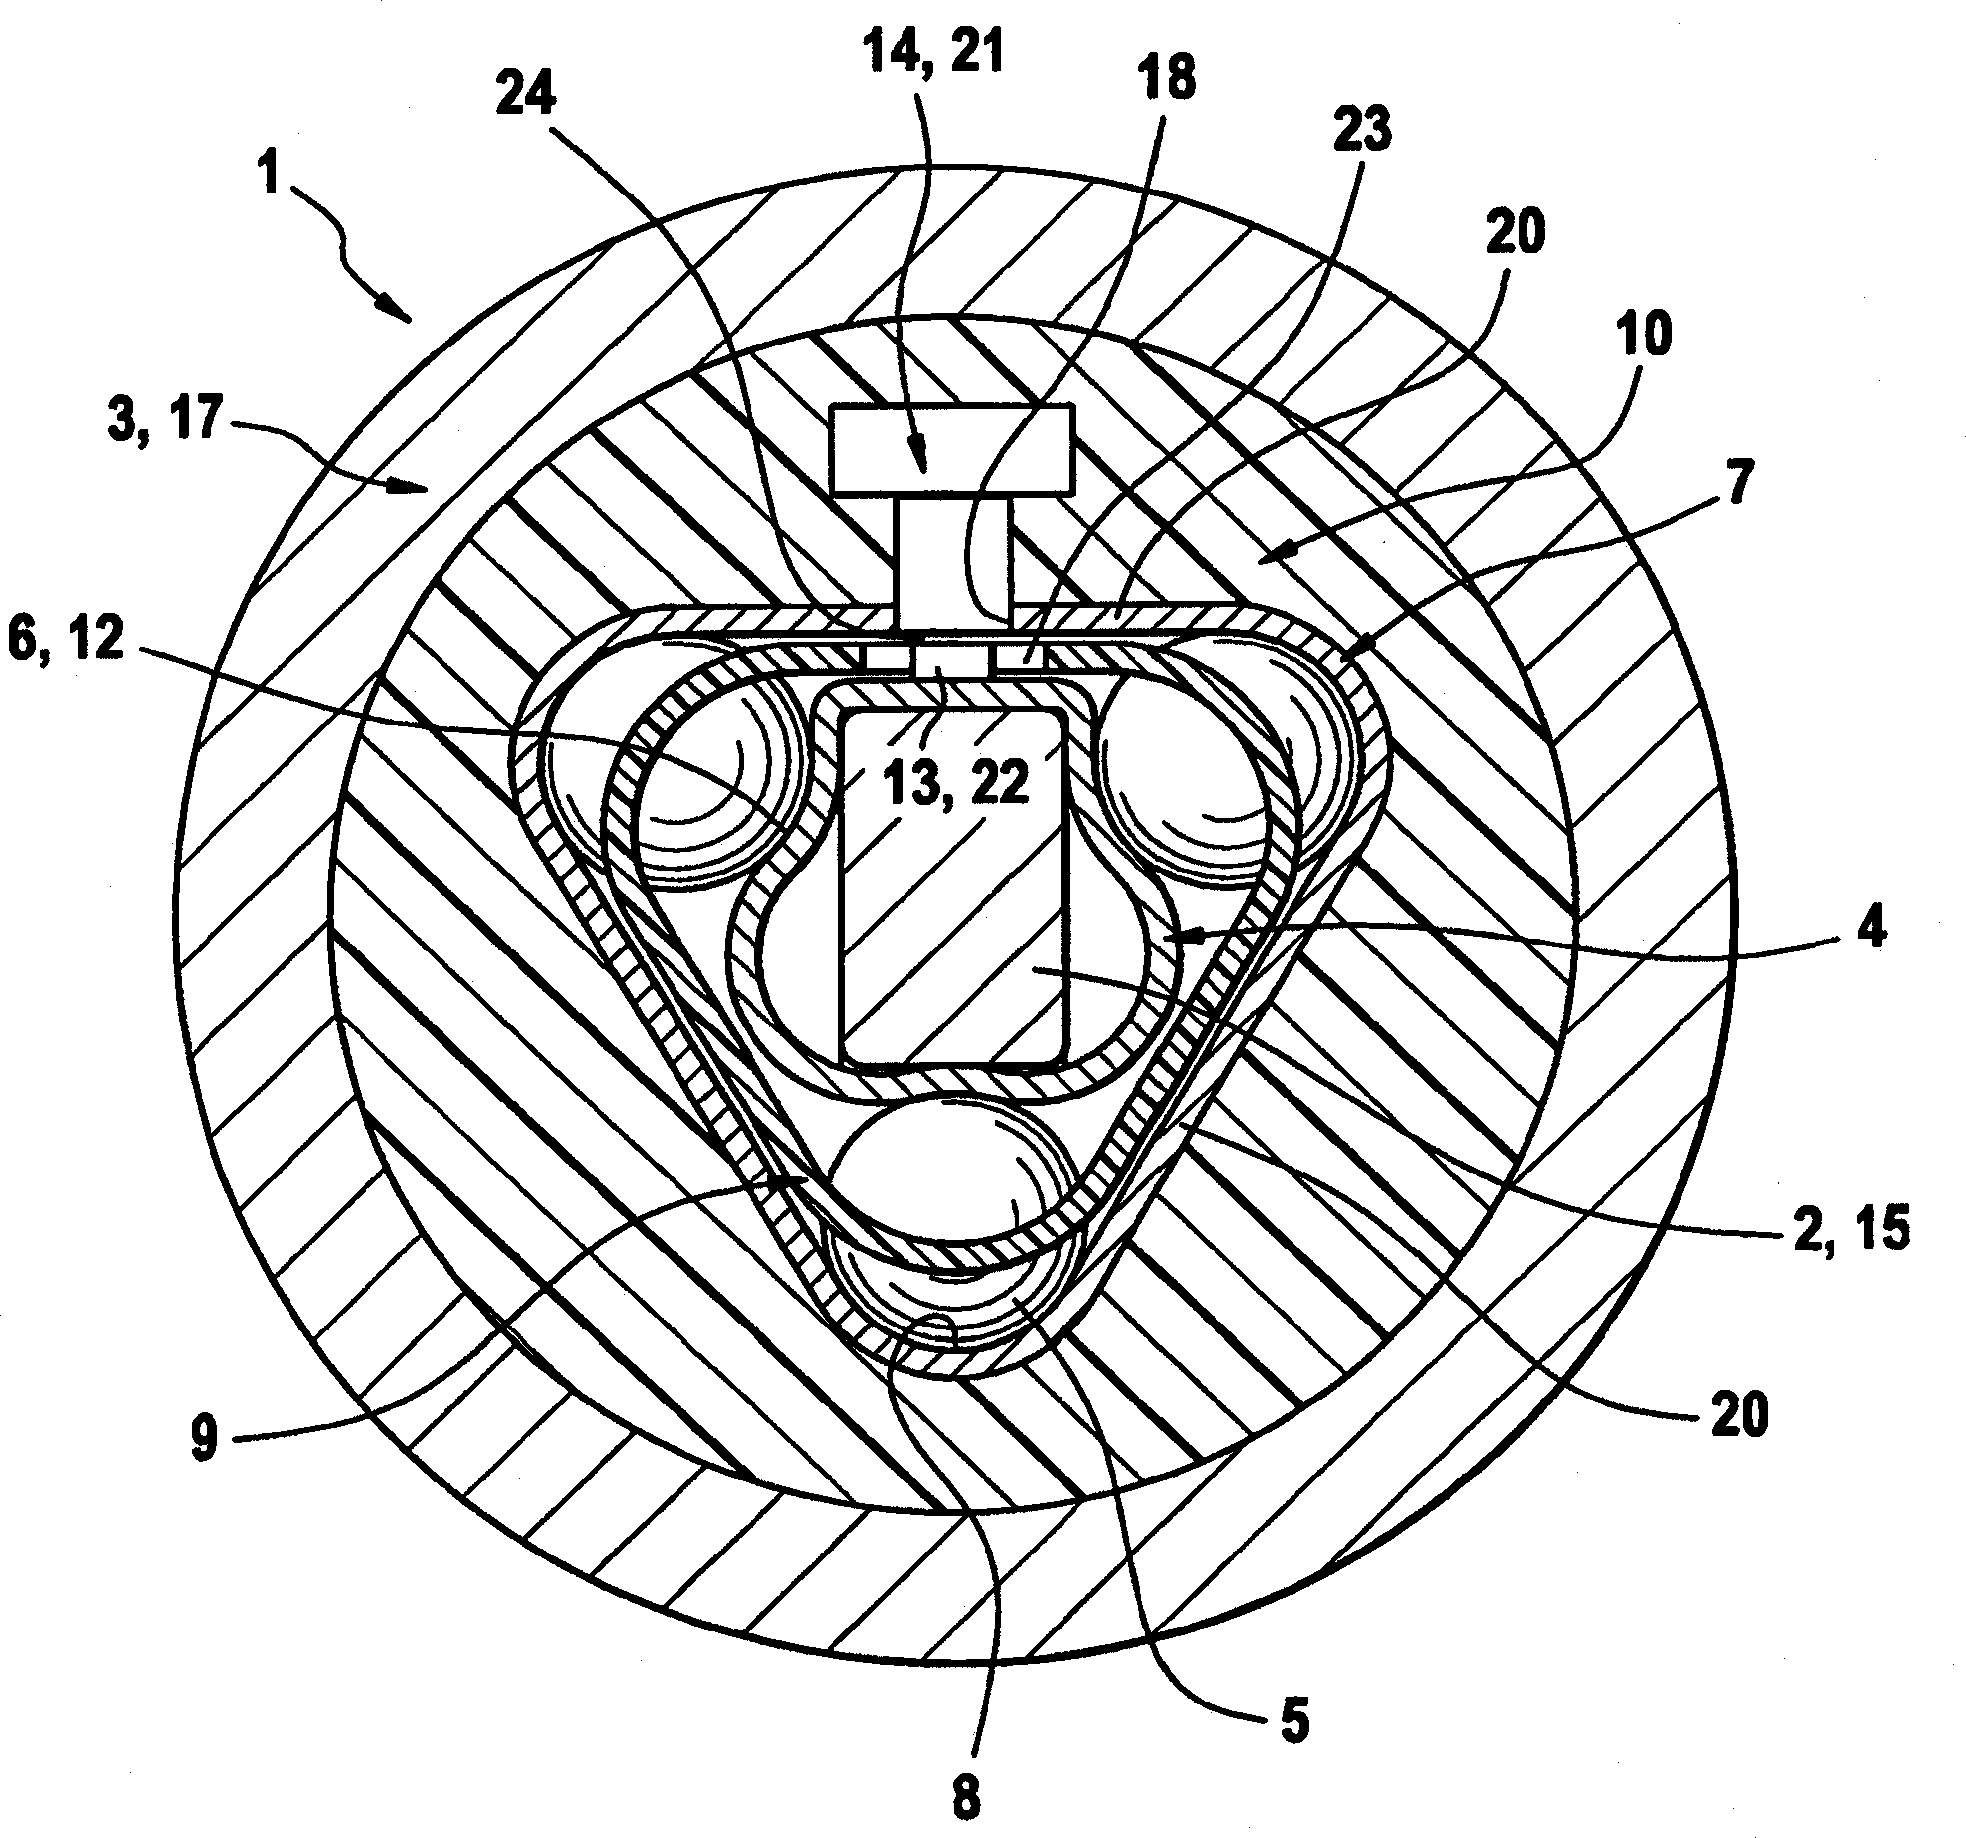 Roller bearing for two components that can be at least axially moved toward one another, particularly for transmission shifting elements